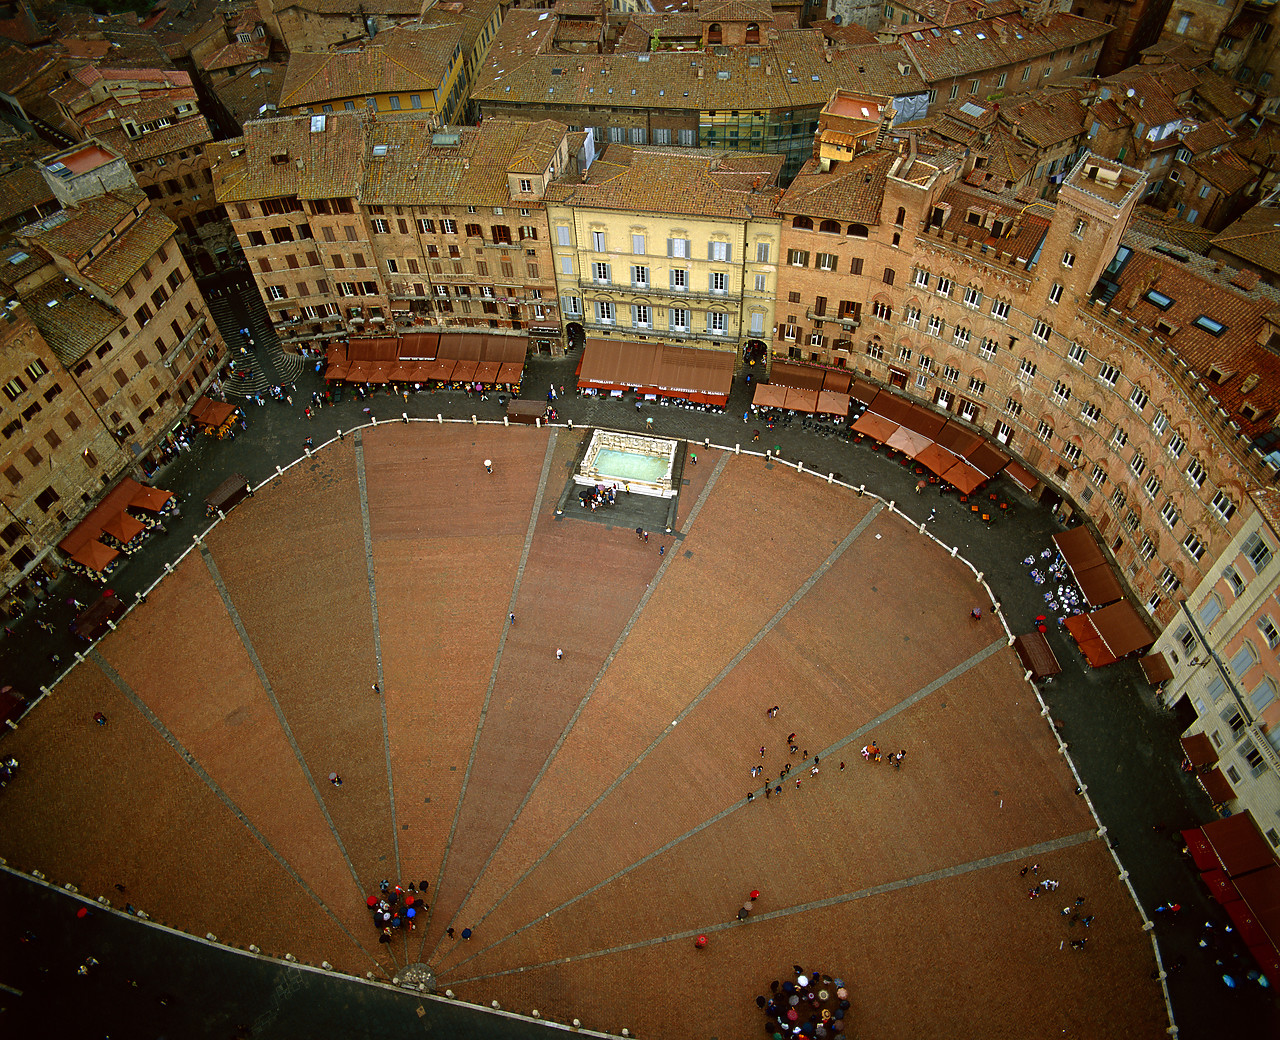 #020188-5 - View over Piazza del Campo, Siena, Tuscany, Italy